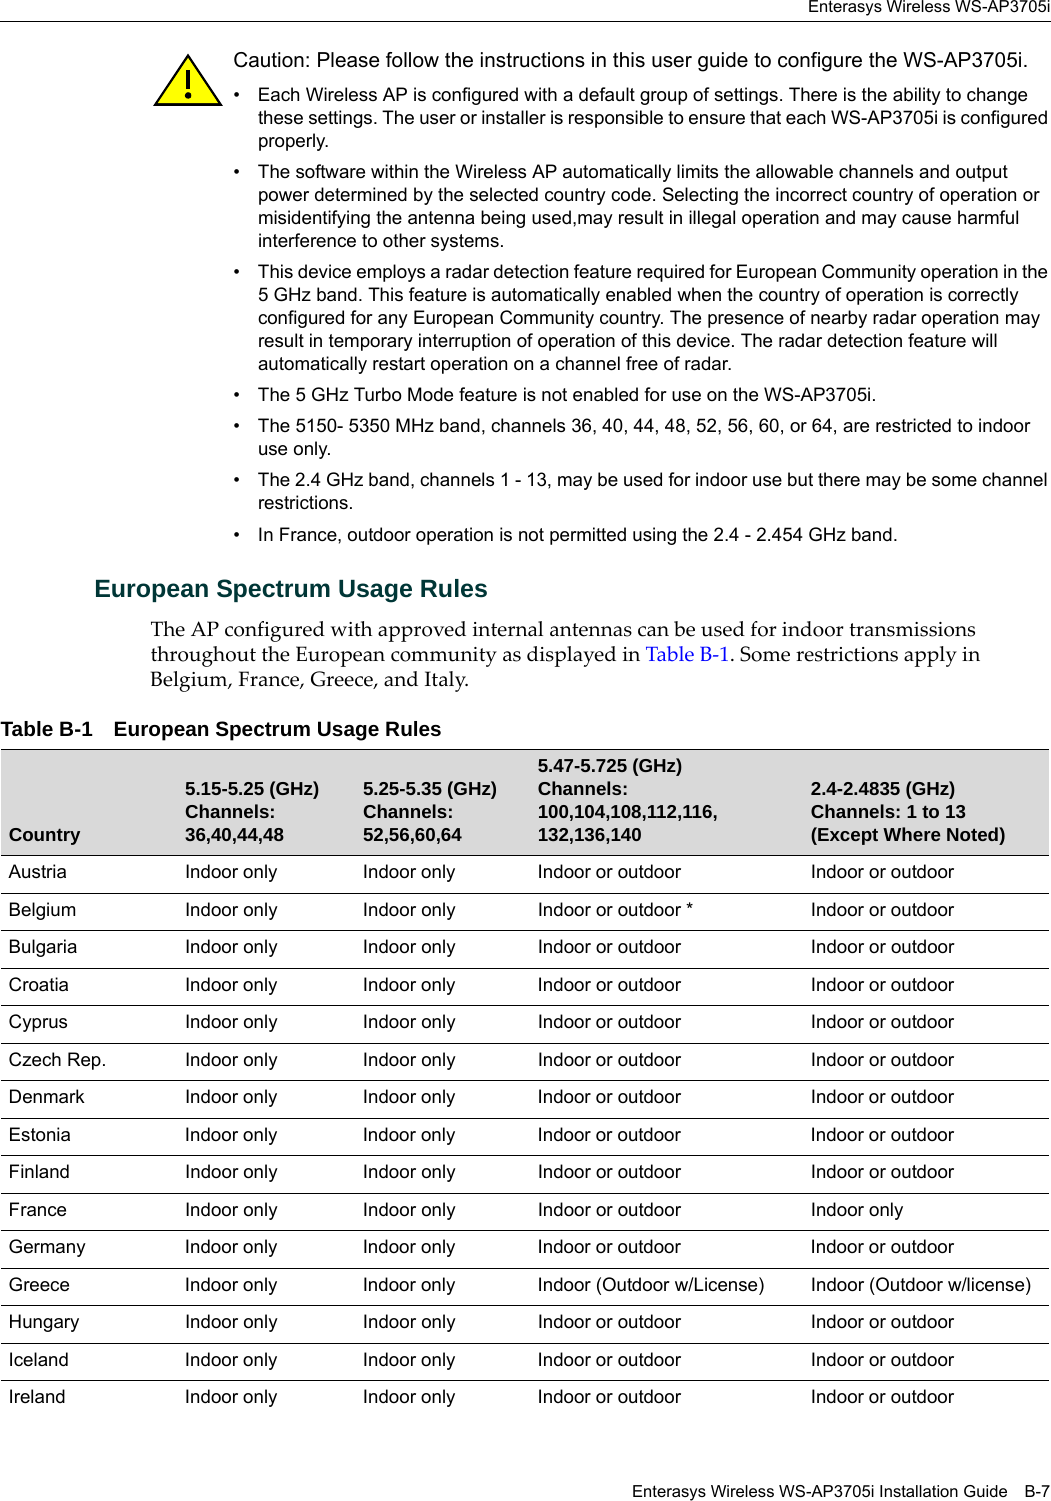 Enterasys Wireless WS-AP3705iEnterasys Wireless WS-AP3705i Installation Guide B-7European Spectrum Usage RulesThe AP configured with approved internal antennas can be used for indoor transmissions throughout the European community as displayed in Table B-1. Some restrictions apply in Belgium, France, Greece, and Italy.Caution: Please follow the instructions in this user guide to configure the WS-AP3705i.• Each Wireless AP is configured with a default group of settings. There is the ability to change these settings. The user or installer is responsible to ensure that each WS-AP3705i is configured properly. • The software within the Wireless AP automatically limits the allowable channels and output power determined by the selected country code. Selecting the incorrect country of operation or misidentifying the antenna being used,may result in illegal operation and may cause harmful interference to other systems.• This device employs a radar detection feature required for European Community operation in the 5 GHz band. This feature is automatically enabled when the country of operation is correctly configured for any European Community country. The presence of nearby radar operation may result in temporary interruption of operation of this device. The radar detection feature will automatically restart operation on a channel free of radar.• The 5 GHz Turbo Mode feature is not enabled for use on the WS-AP3705i.• The 5150- 5350 MHz band, channels 36, 40, 44, 48, 52, 56, 60, or 64, are restricted to indoor use only.• The 2.4 GHz band, channels 1 - 13, may be used for indoor use but there may be some channel restrictions.• In France, outdoor operation is not permitted using the 2.4 - 2.454 GHz band.Table B-1 European Spectrum Usage RulesCountry5.15-5.25 (GHz) Channels: 36,40,44,485.25-5.35 (GHz)Channels: 52,56,60,645.47-5.725 (GHz)Channels: 100,104,108,112,116,132,136,1402.4-2.4835 (GHz)Channels: 1 to 13(Except Where Noted)Austria Indoor only Indoor only Indoor or outdoor Indoor or outdoorBelgium Indoor only Indoor only Indoor or outdoor * Indoor or outdoorBulgaria Indoor only Indoor only Indoor or outdoor Indoor or outdoorCroatia Indoor only Indoor only Indoor or outdoor Indoor or outdoorCyprus Indoor only Indoor only Indoor or outdoor Indoor or outdoorCzech Rep. Indoor only Indoor only Indoor or outdoor Indoor or outdoorDenmark Indoor only Indoor only Indoor or outdoor Indoor or outdoorEstonia Indoor only Indoor only Indoor or outdoor Indoor or outdoorFinland Indoor only Indoor only Indoor or outdoor Indoor or outdoorFrance Indoor only Indoor only Indoor or outdoor Indoor onlyGermany Indoor only Indoor only Indoor or outdoor Indoor or outdoorGreece Indoor only Indoor only Indoor (Outdoor w/License) Indoor (Outdoor w/license)Hungary Indoor only Indoor only Indoor or outdoor Indoor or outdoorIceland Indoor only Indoor only Indoor or outdoor Indoor or outdoorIreland Indoor only Indoor only Indoor or outdoor Indoor or outdoor